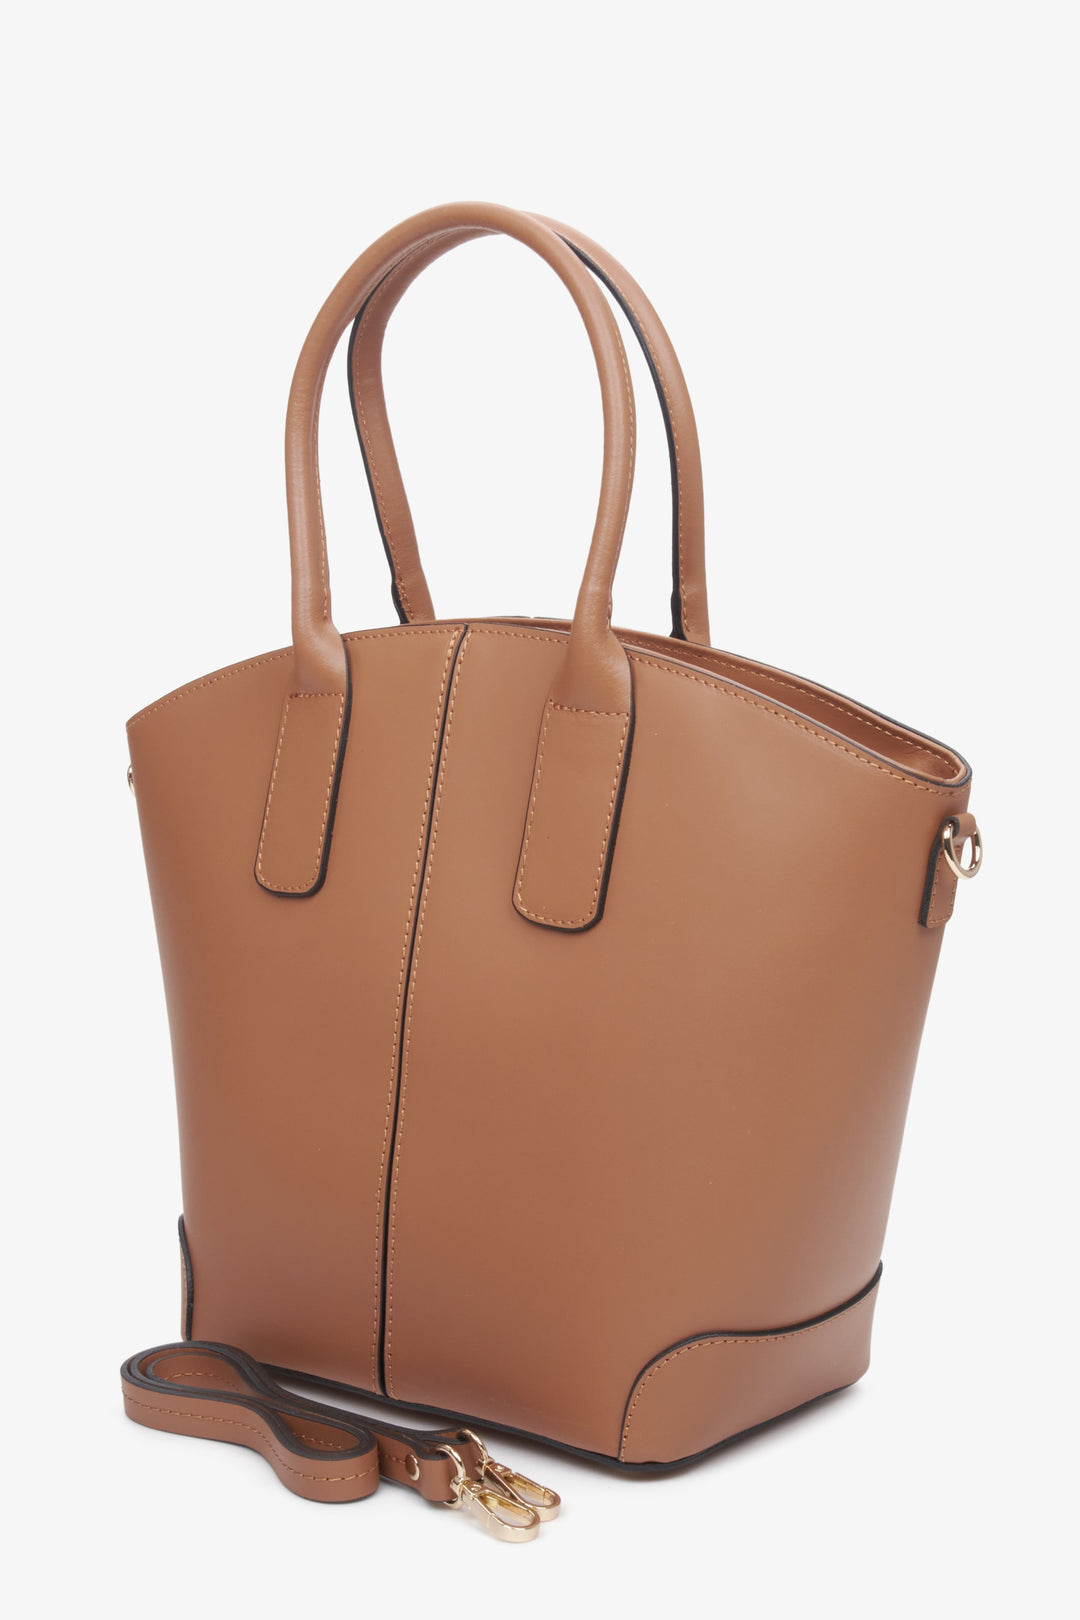 Women's brown shopper bag made of genuine leather.